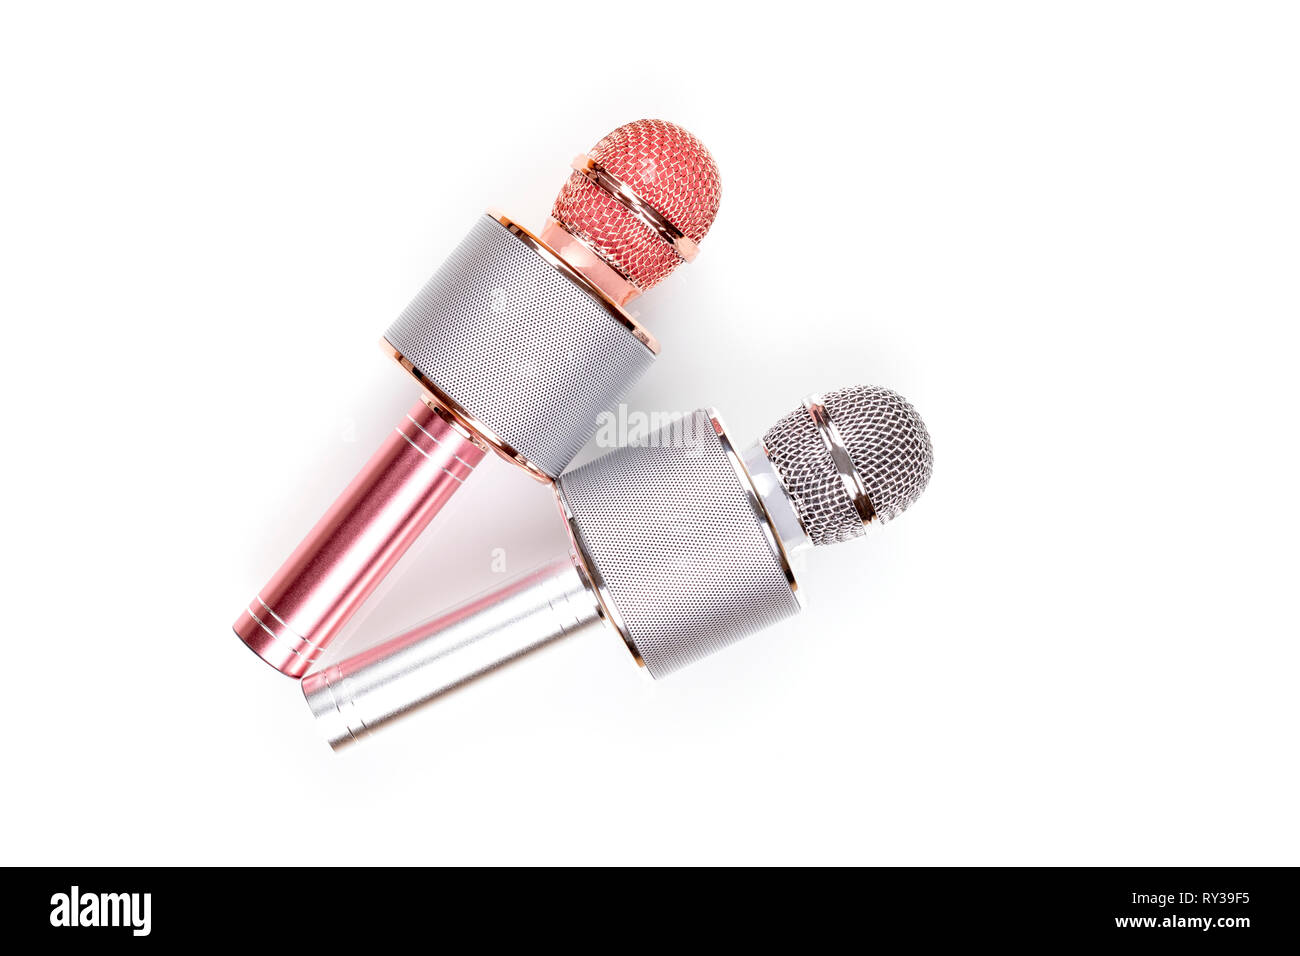 Two microphones isolated over white background . Two wireless microphones for karaoke or entertainment. - Image Stock Photo